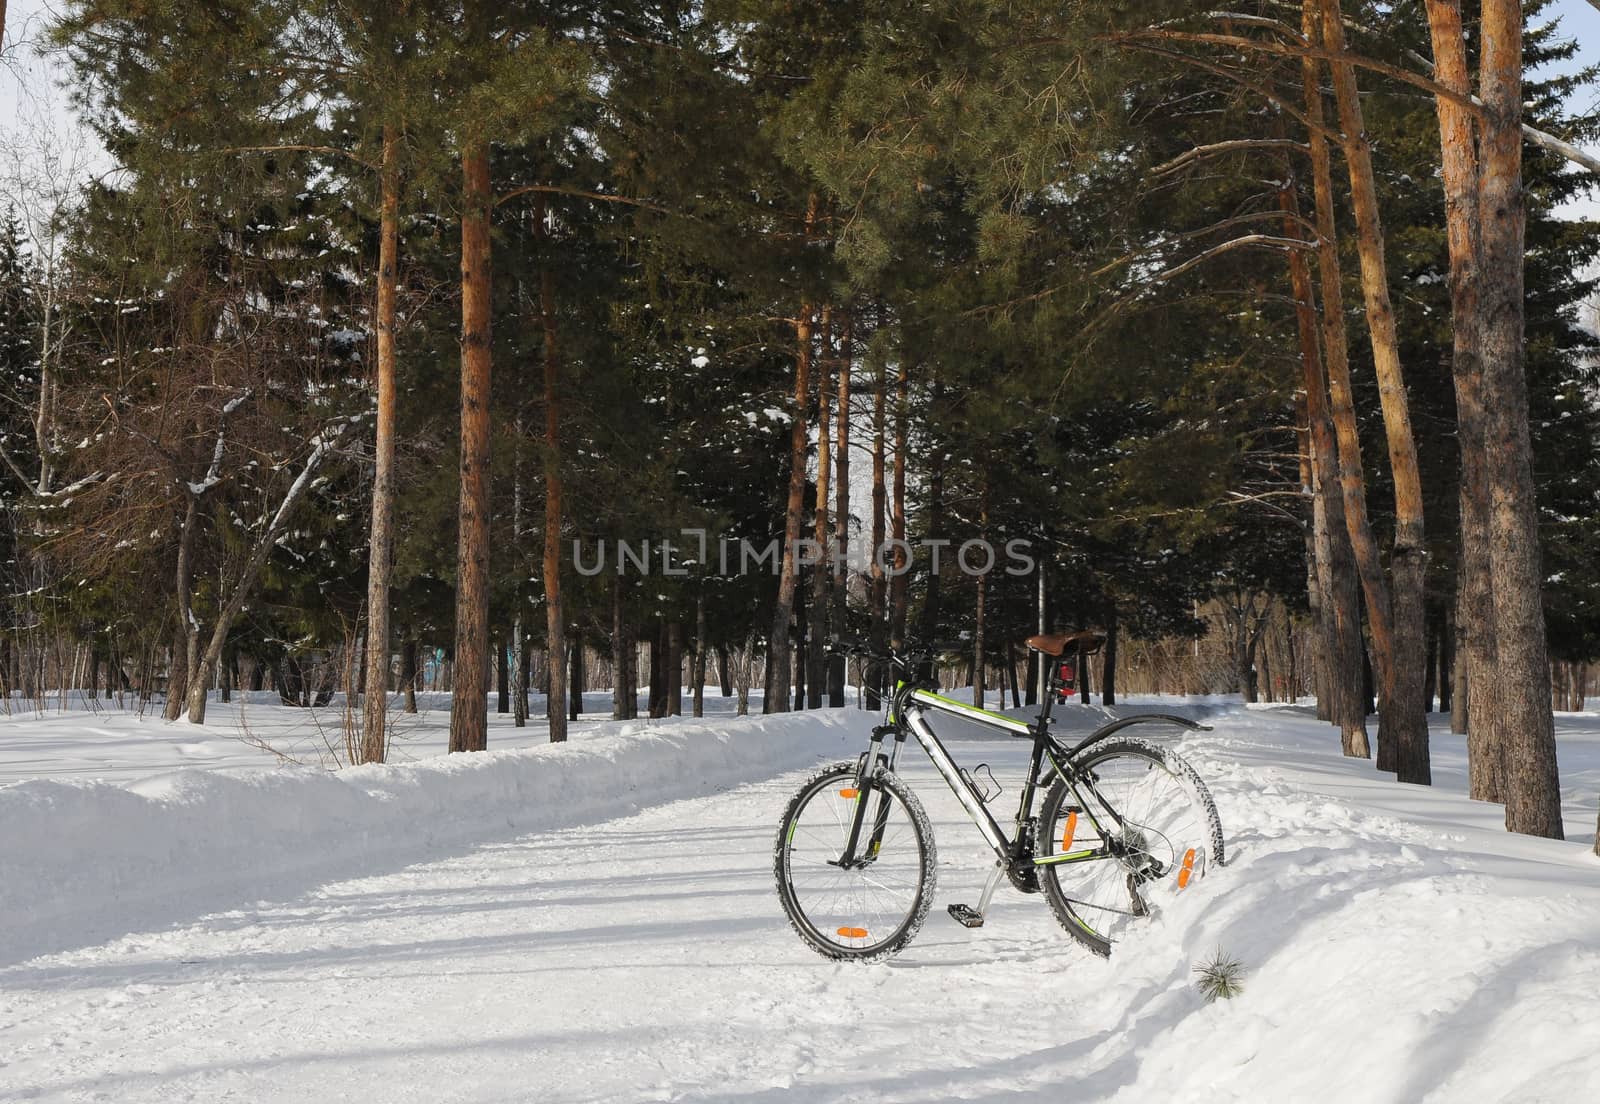 The bike stands on snow in winter Park.